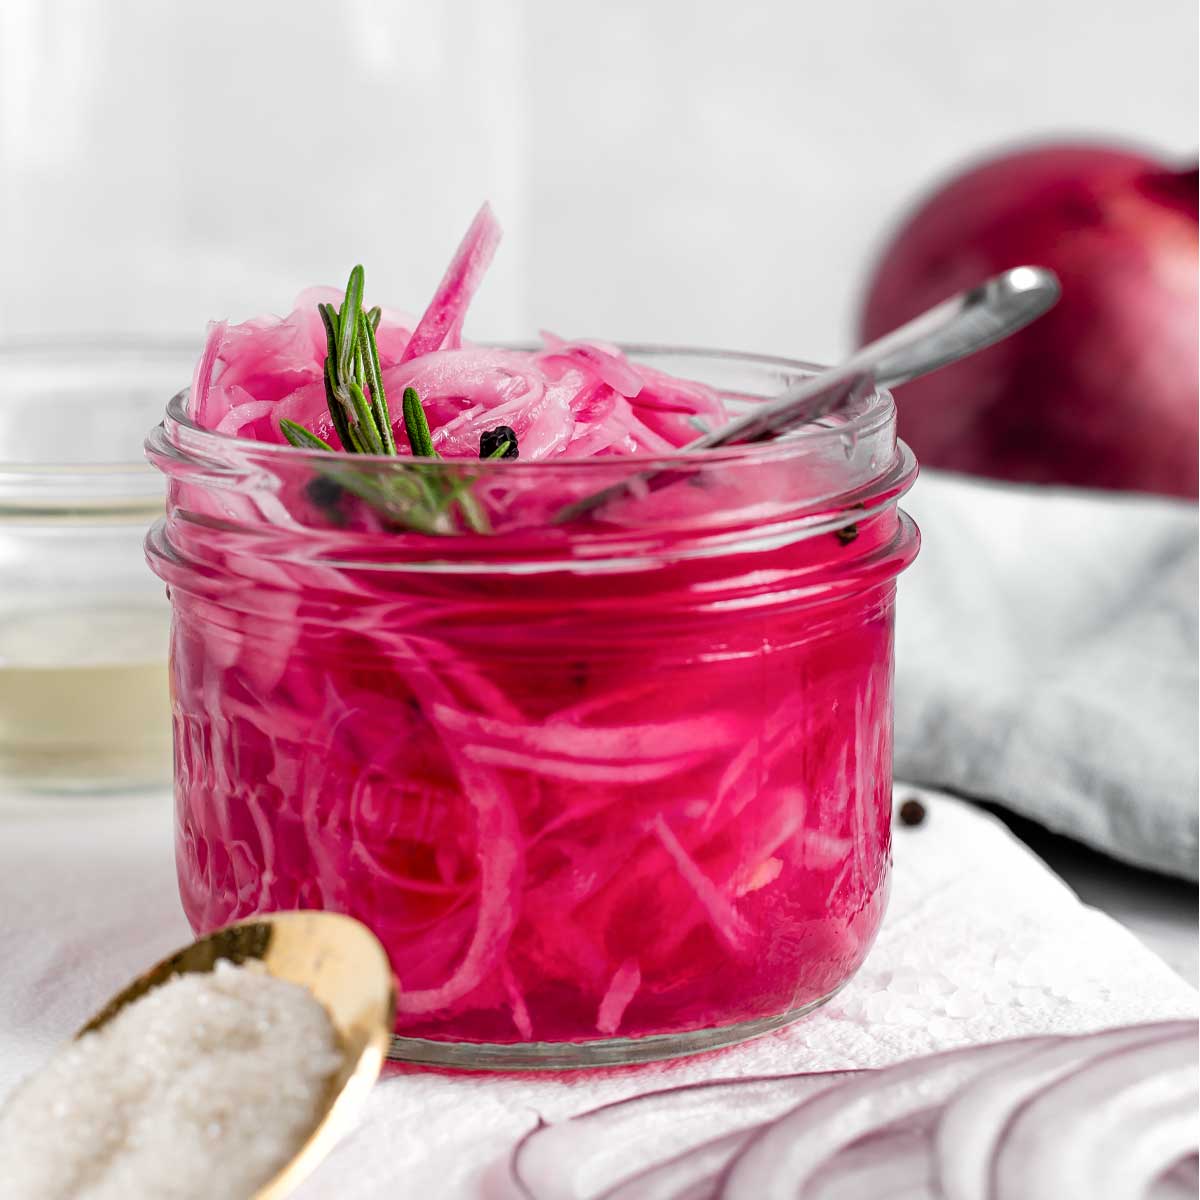 https://tastythriftytimely.com/wp-content/uploads/2023/01/Quick-Pickled-Red-Onion-Featured.jpg